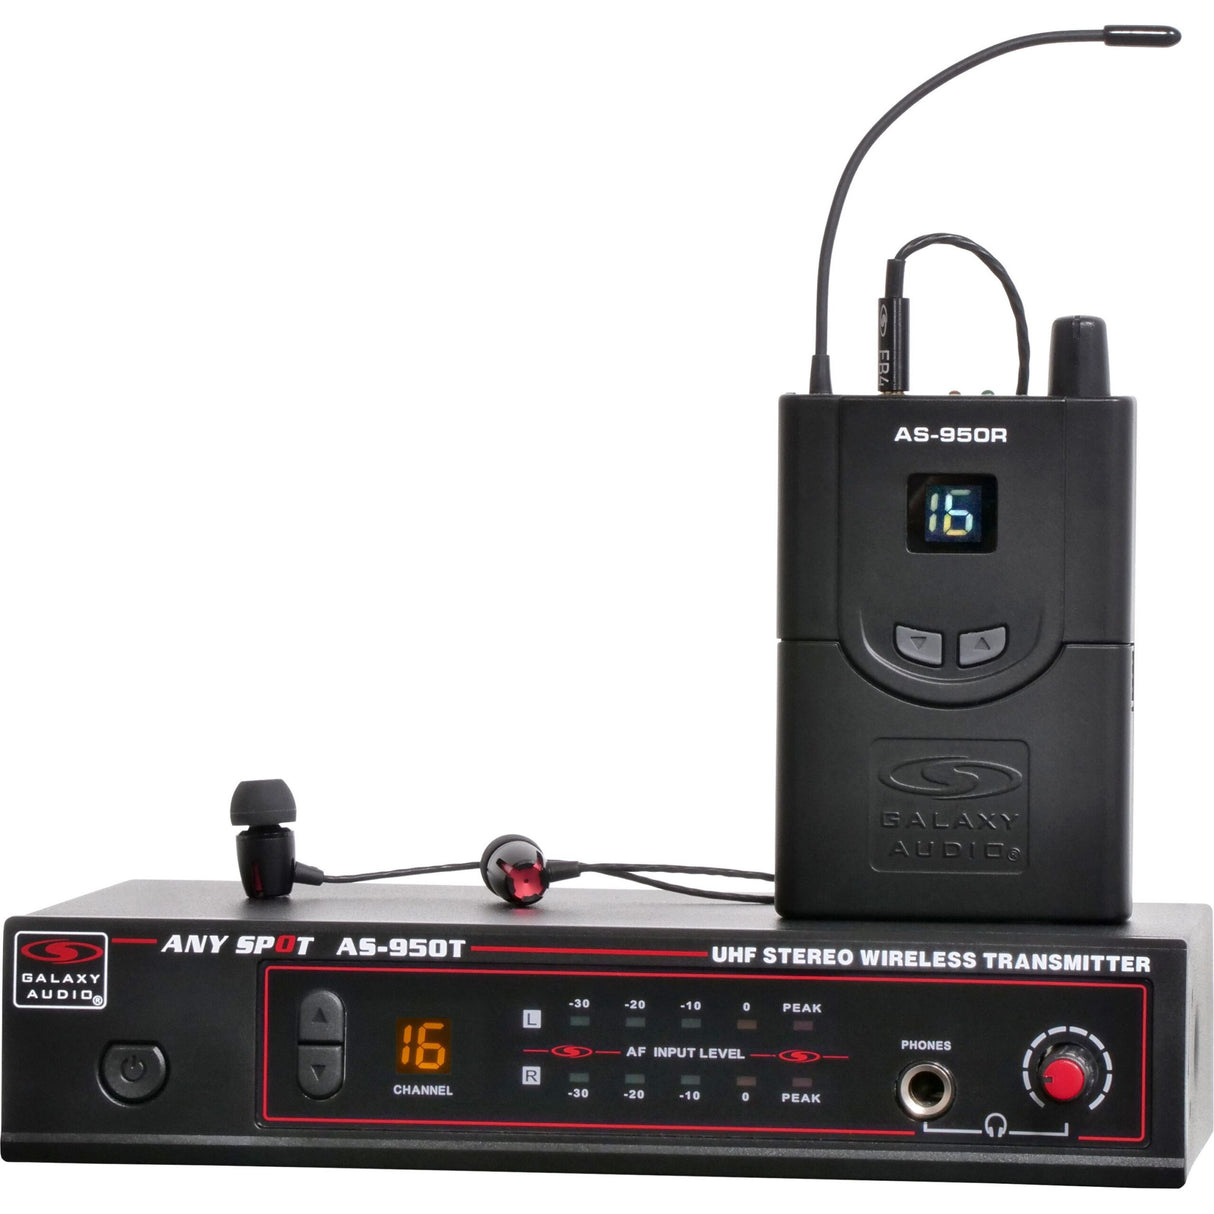 Galaxy Audio AS-950P2 16 Channel Stereo Wireless Personal In-Ear Monitor System, 470-494 MHz